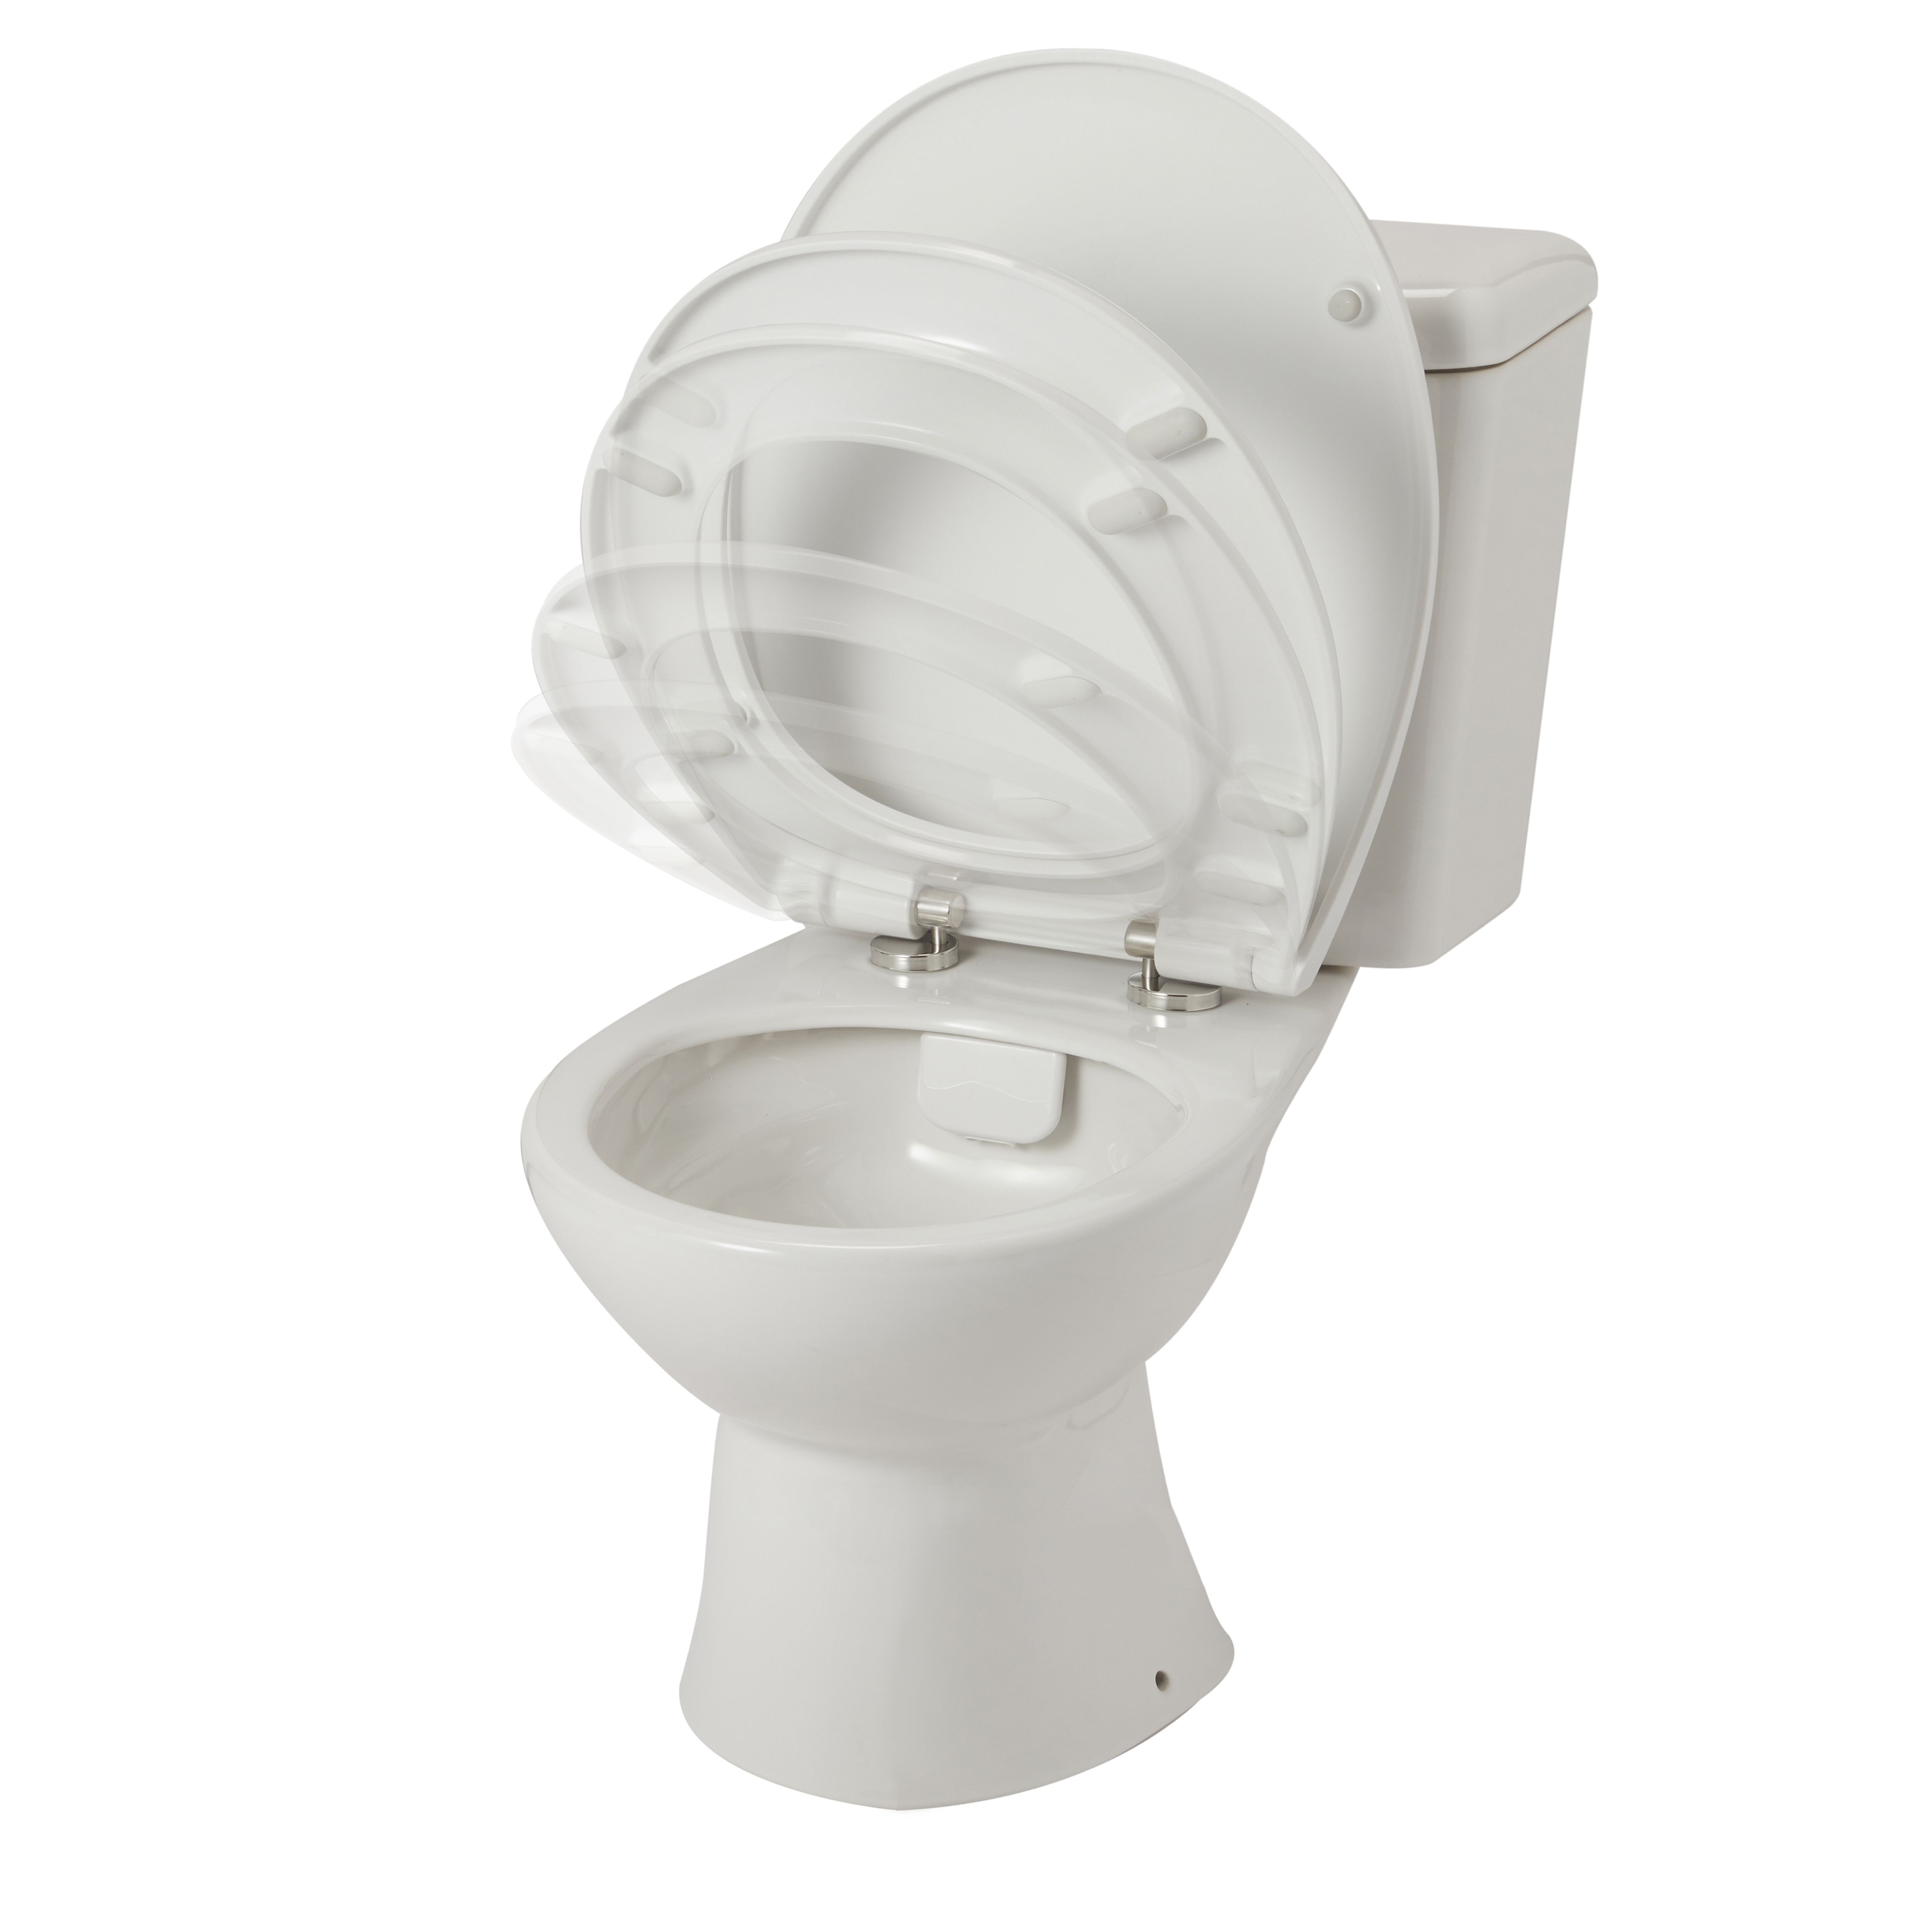 GoodHome Winam White Close-coupled Toilet set with Soft close seat